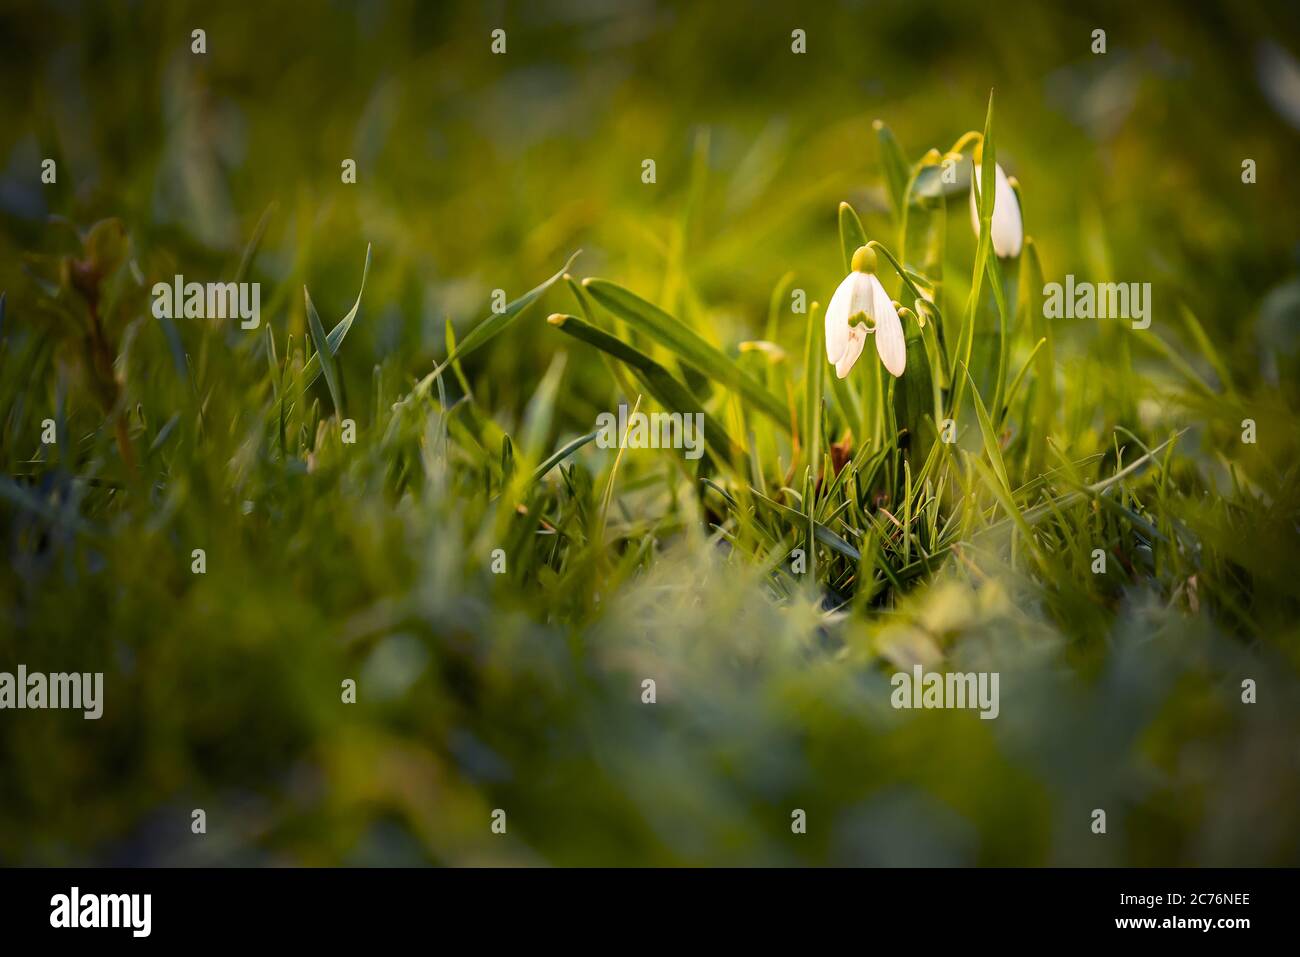 Spring snowdrops in the grass in the garden with a defocused background Stock Photo